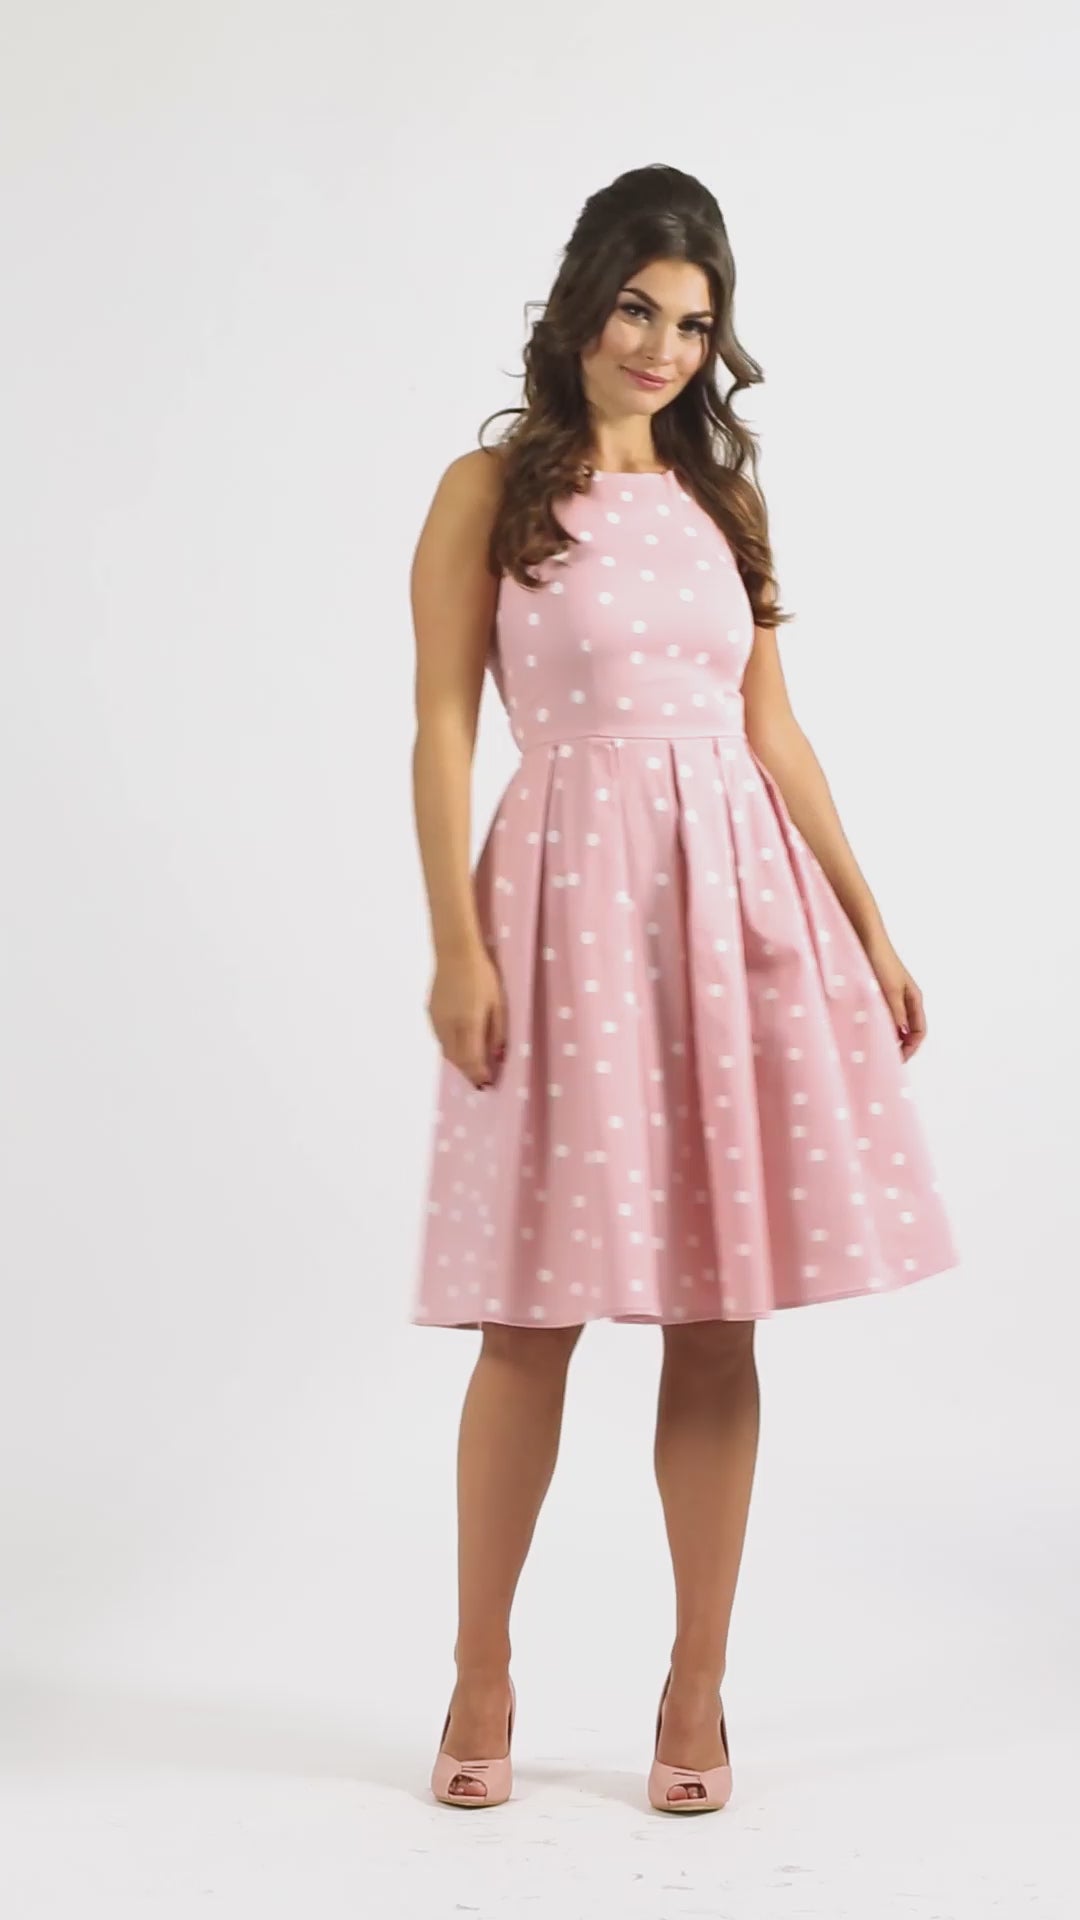 Video of a model wearing our Annie Retro Polka Dot Dress in Pale Pink & White.